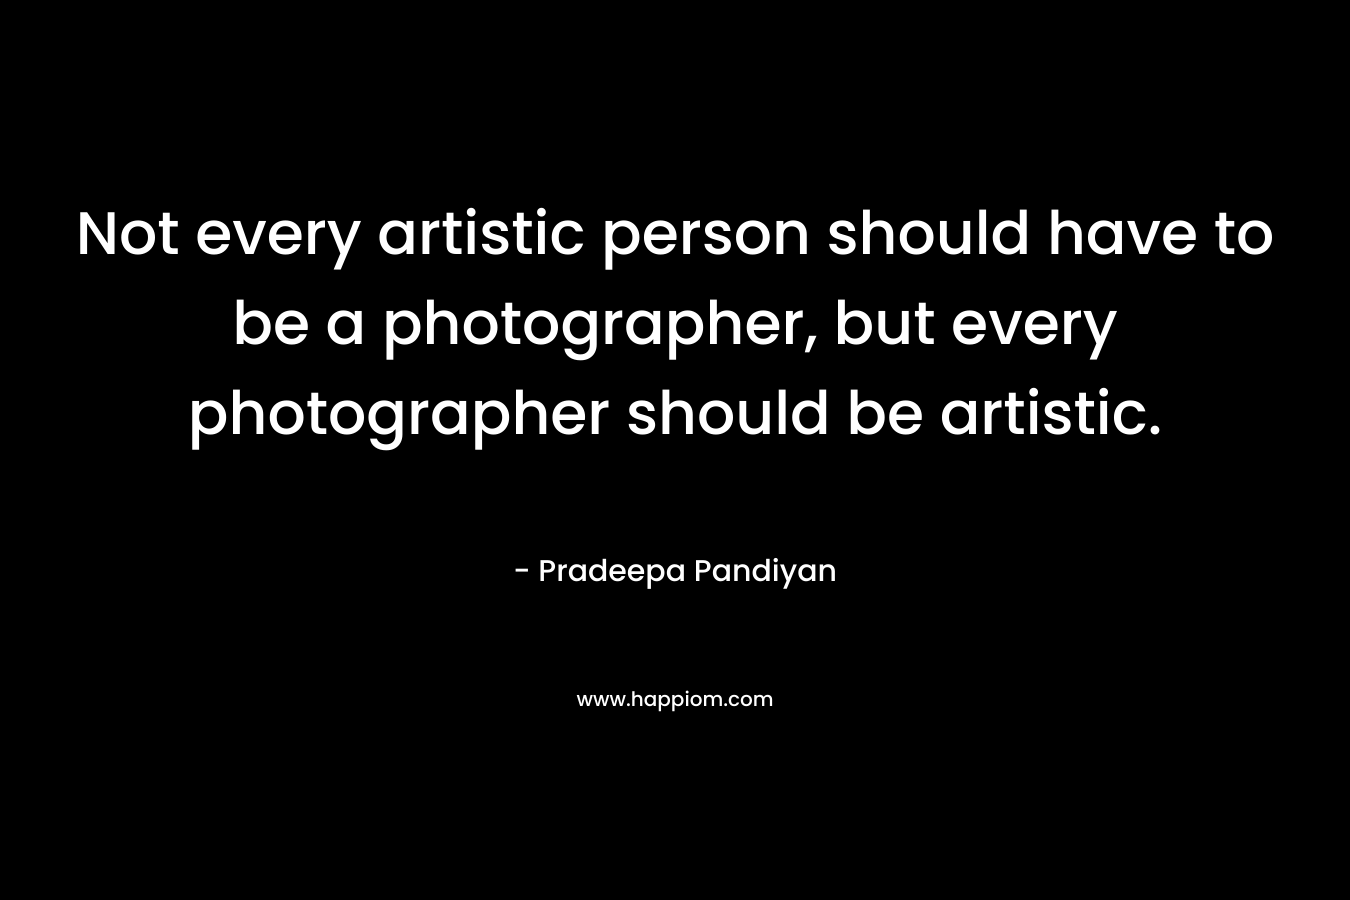 Not every artistic person should have to be a photographer, but every photographer should be artistic. – Pradeepa Pandiyan